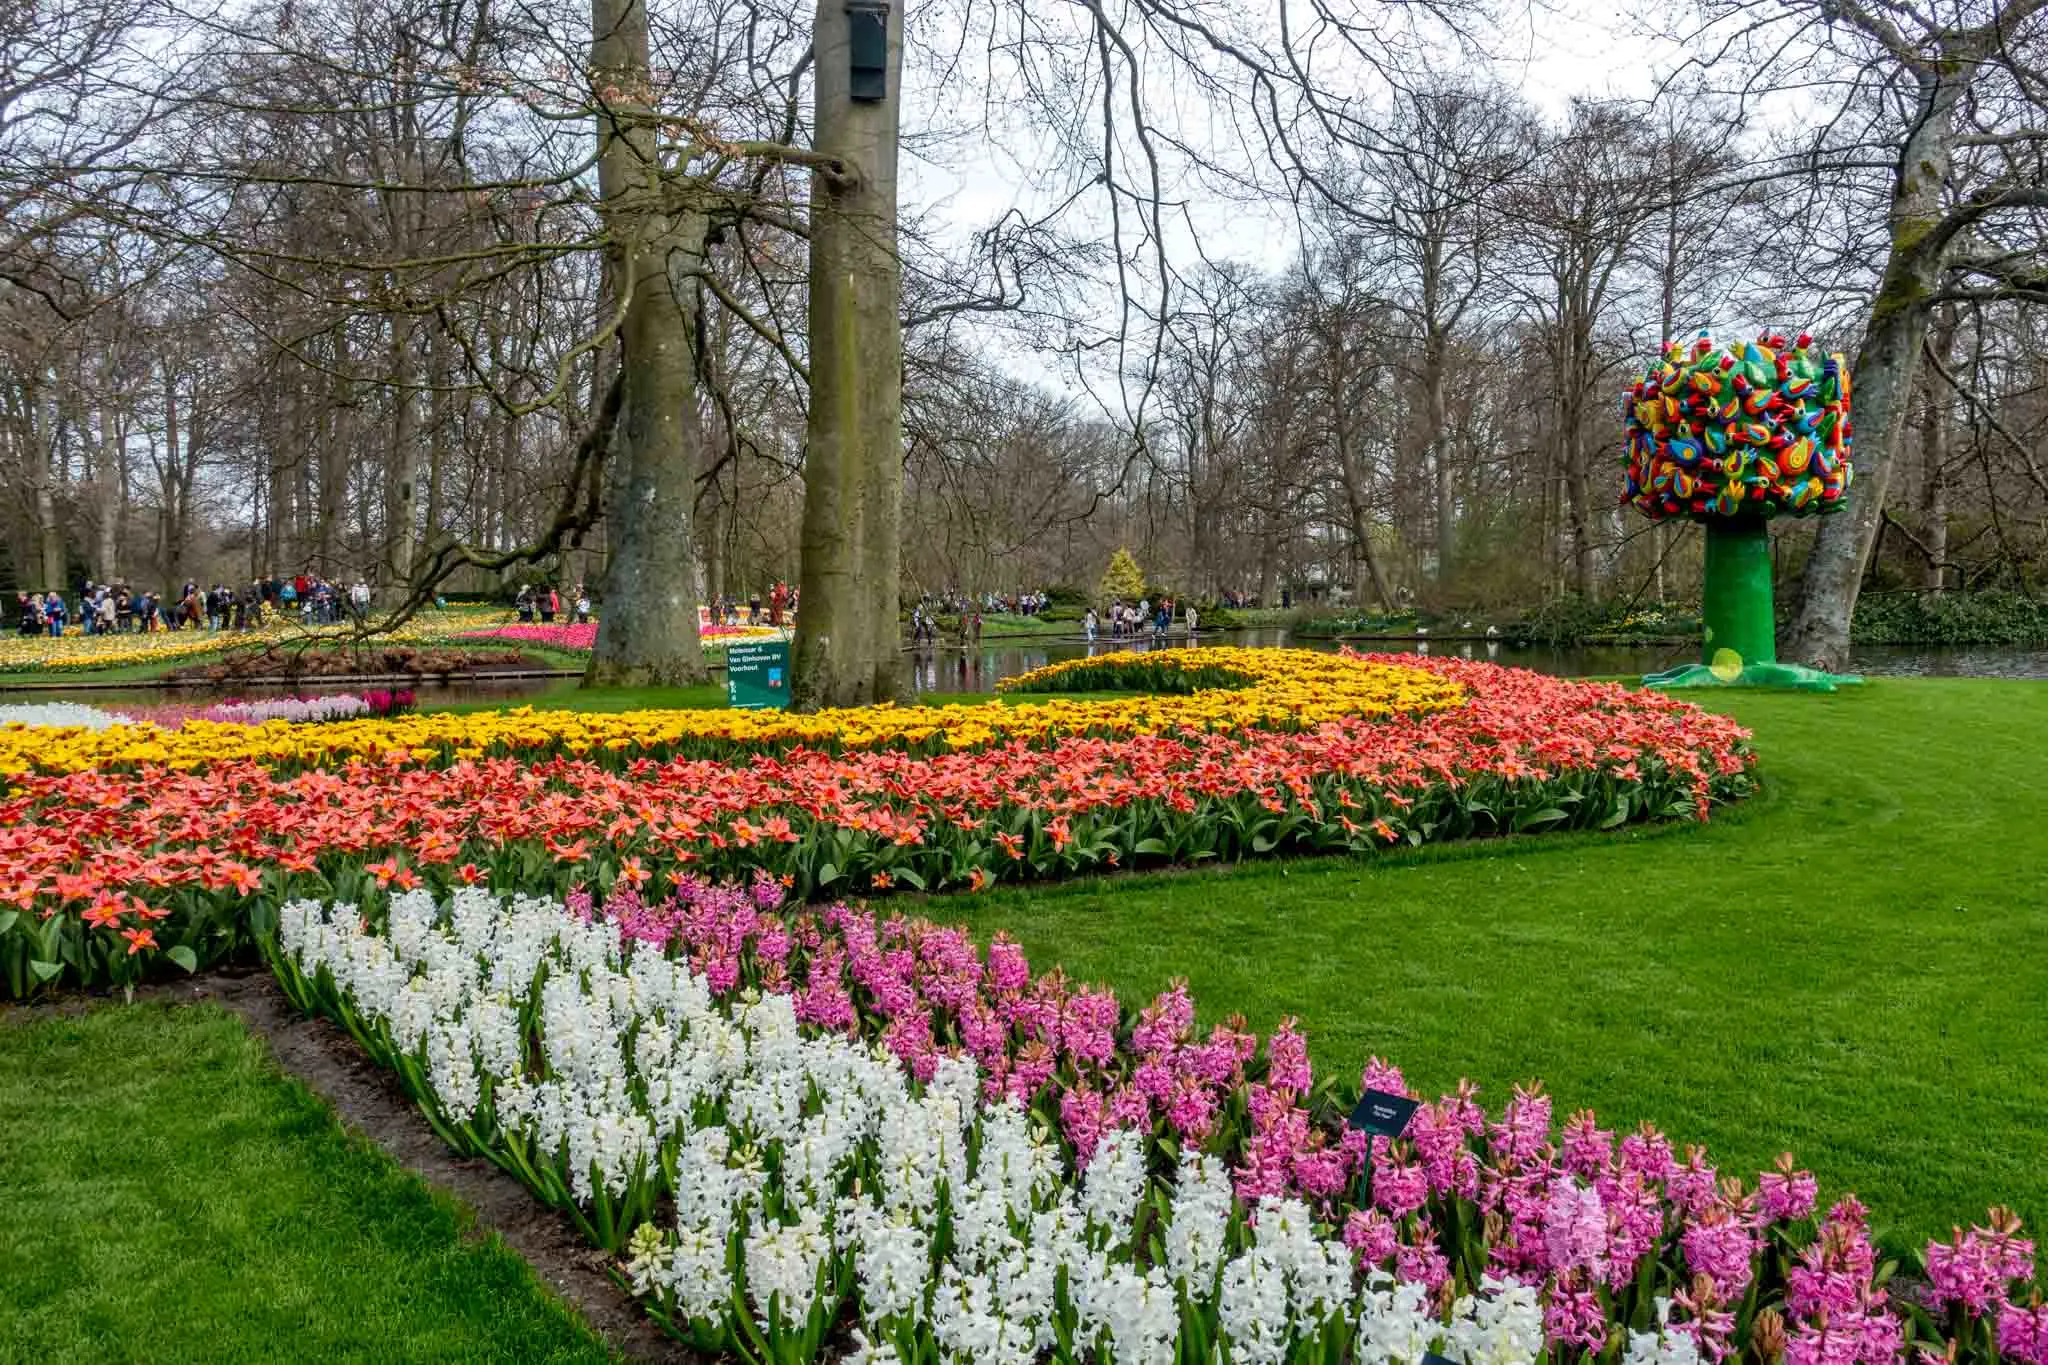 Colorful sculpture beside rows of bright flowers